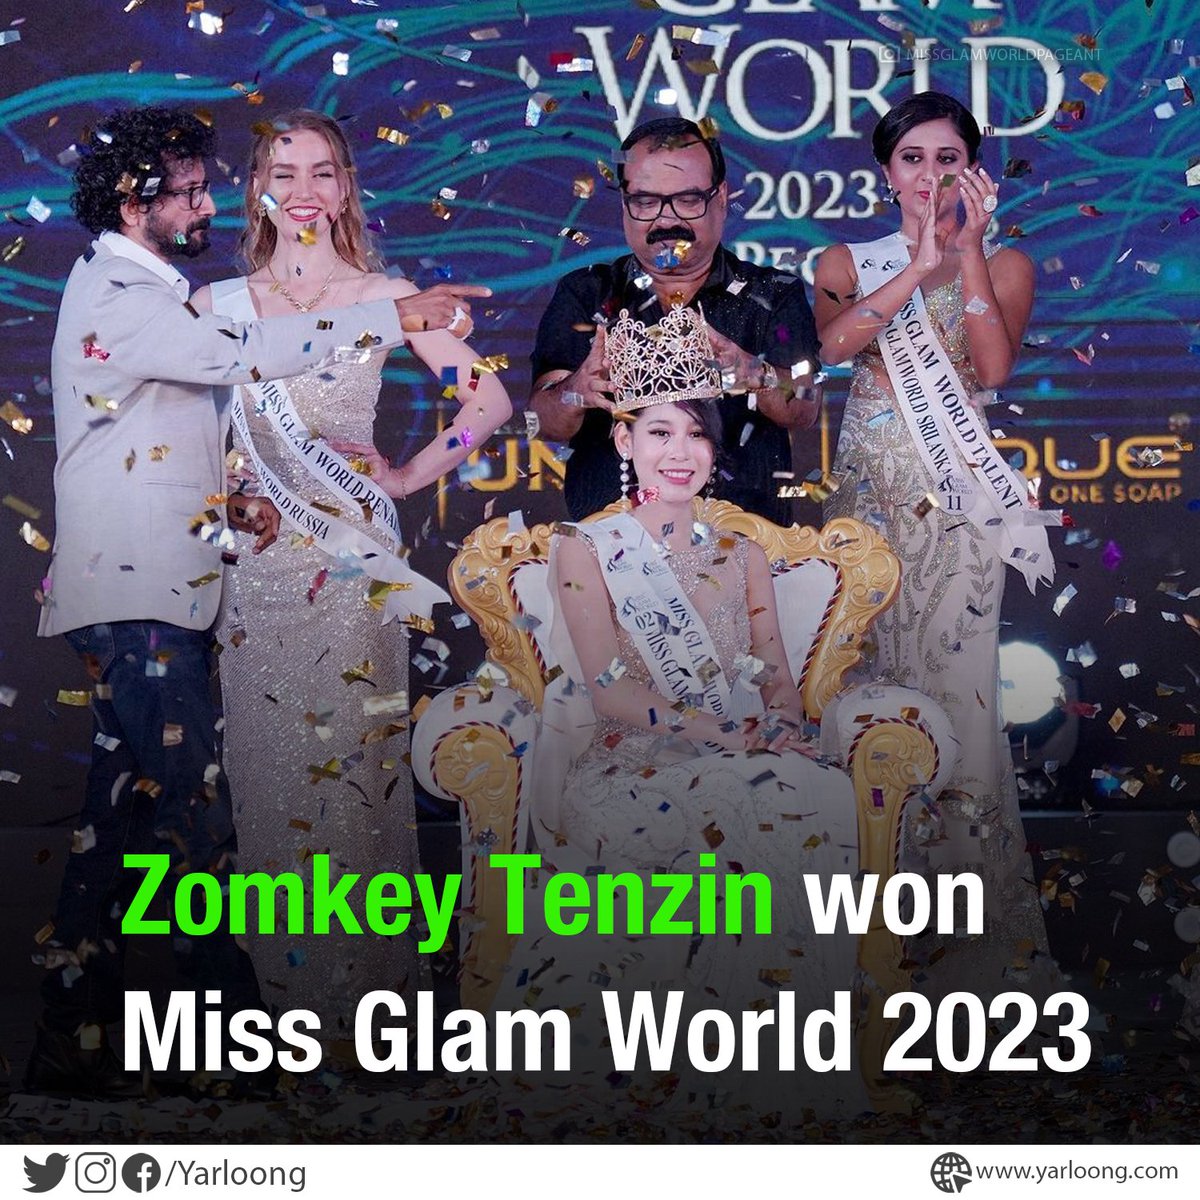 Zomkey hails from Mundgod Tibetan Settlement and moved to Belgium around 10 years ago. The fourth edition of Miss Glam World was conducted on June 21st at Le Meridien, Kochi.
#MissGlamWorld #MissGlamWorld2023 #TibeToday #TibetFlag #Yarloong #YarloongNews